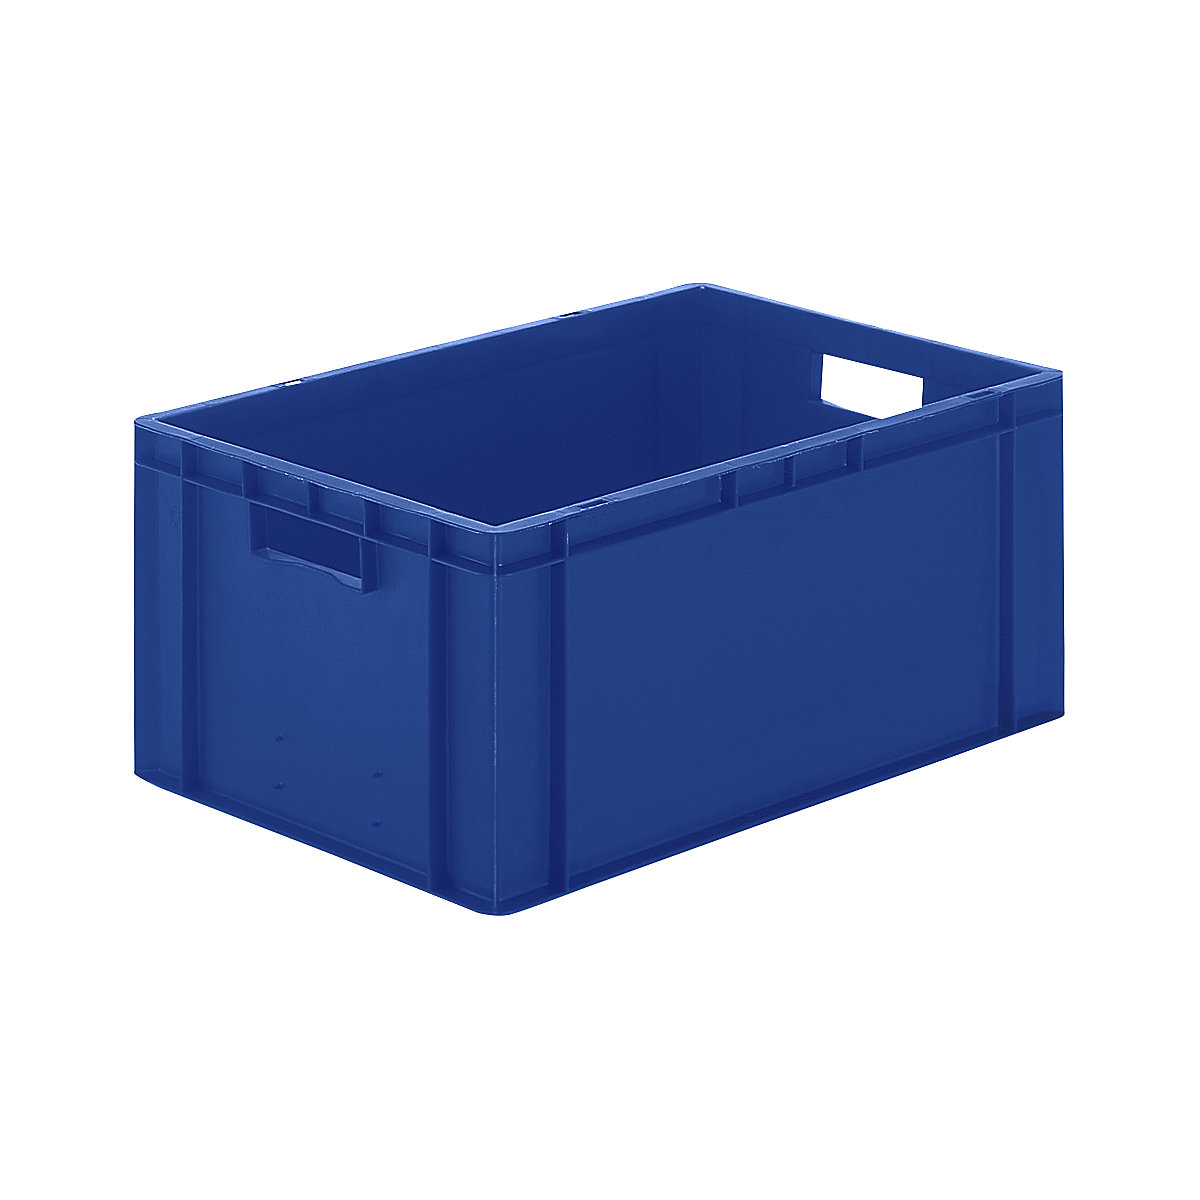 Euro stacking container, closed walls and base, LxWxH 600 x 400 x 270 mm, blue, pack of 5-7